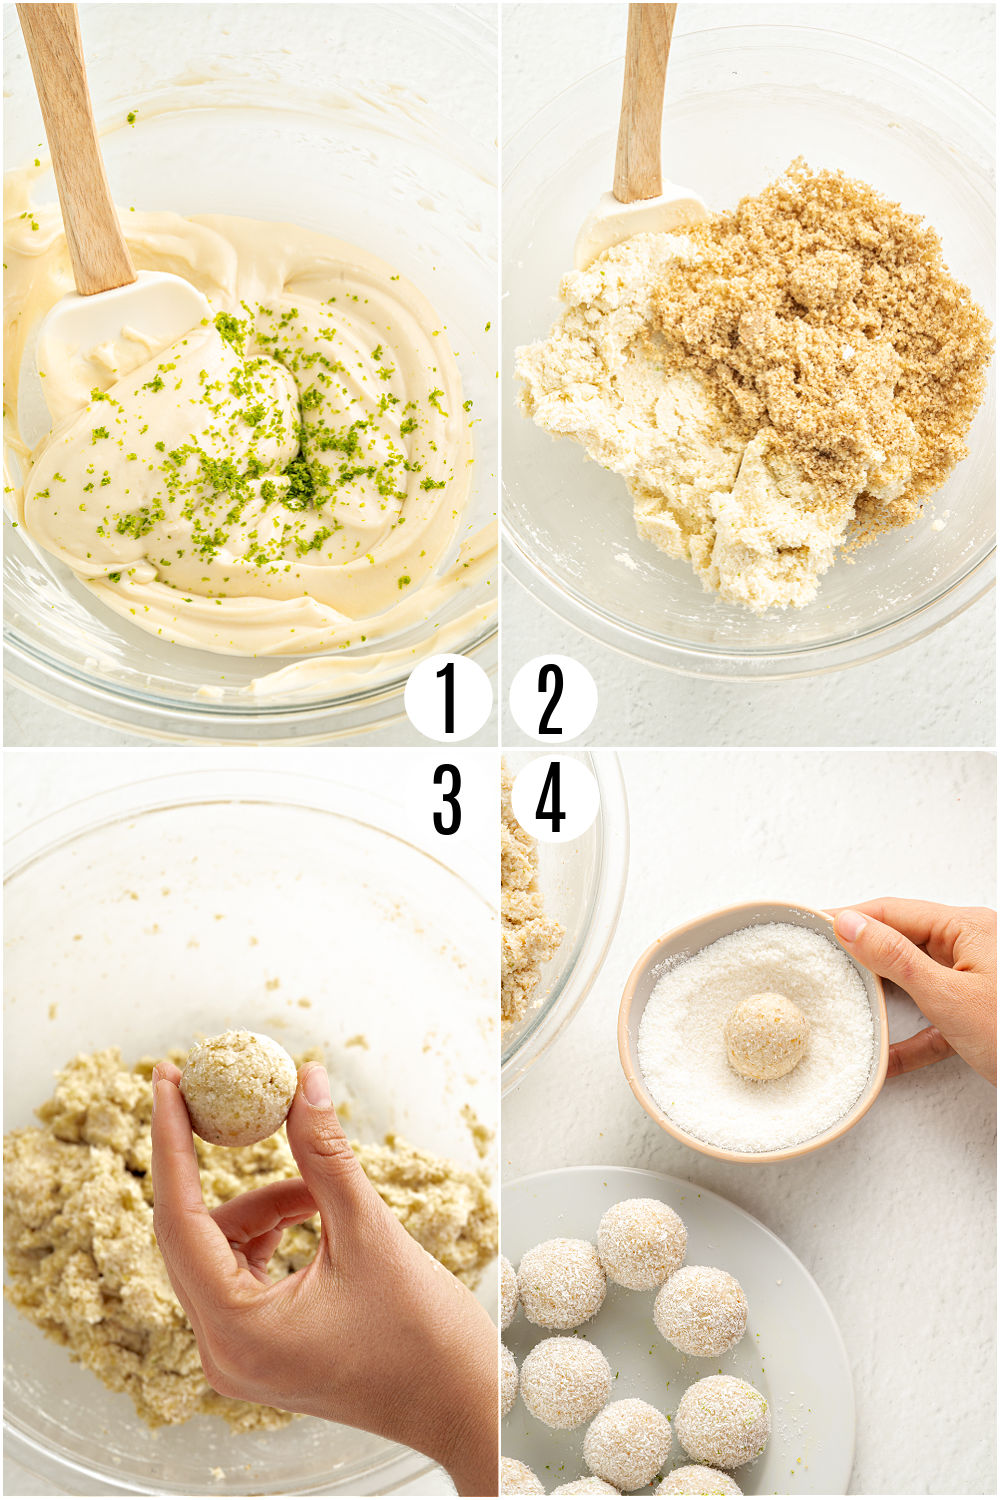 Step by step photos showing how to make energy balls.